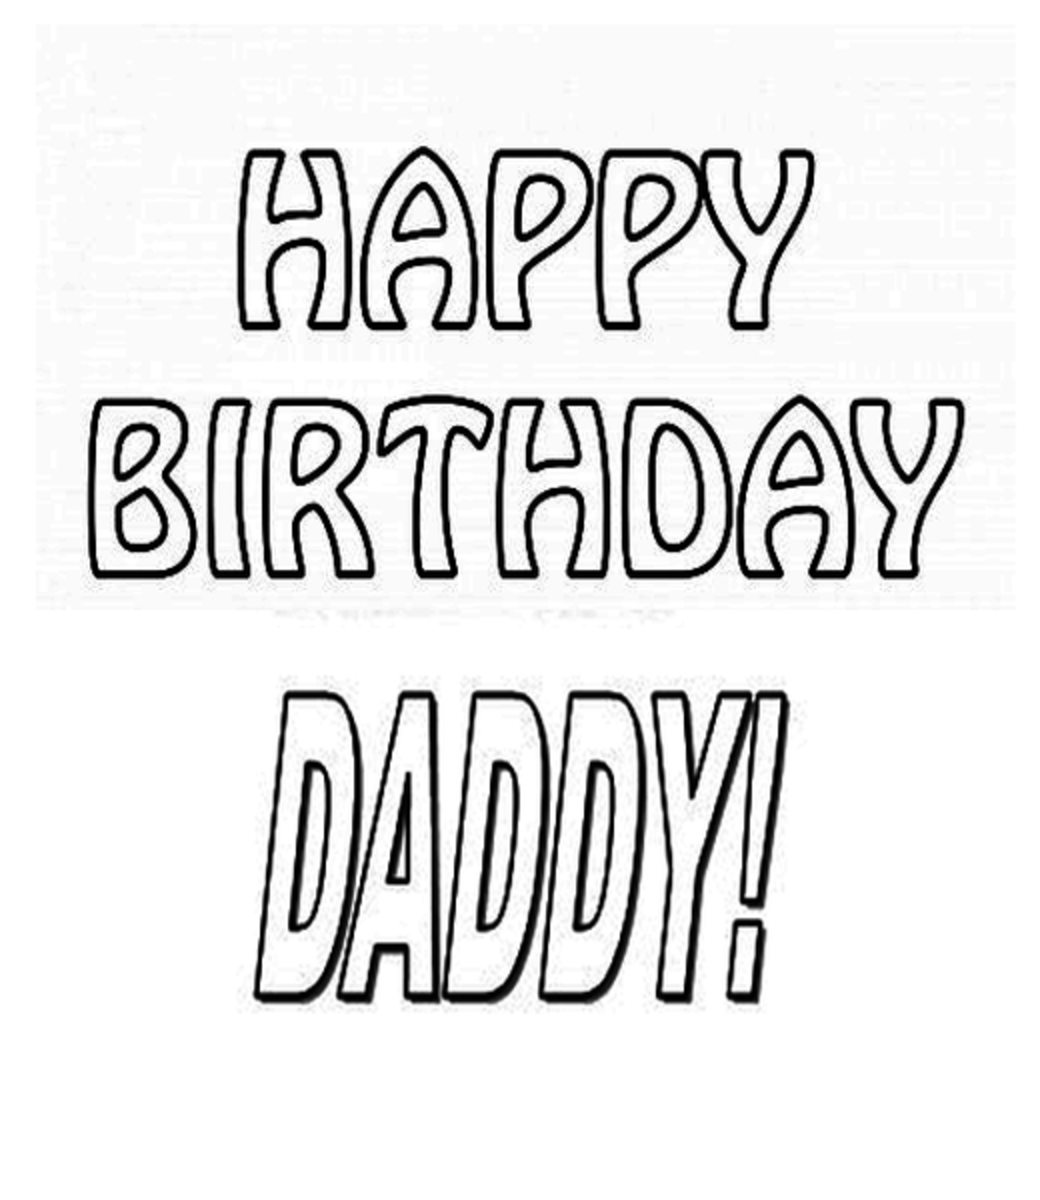 happy-birthday-dad-free-birthday-greetings-cards-messages-hubpages